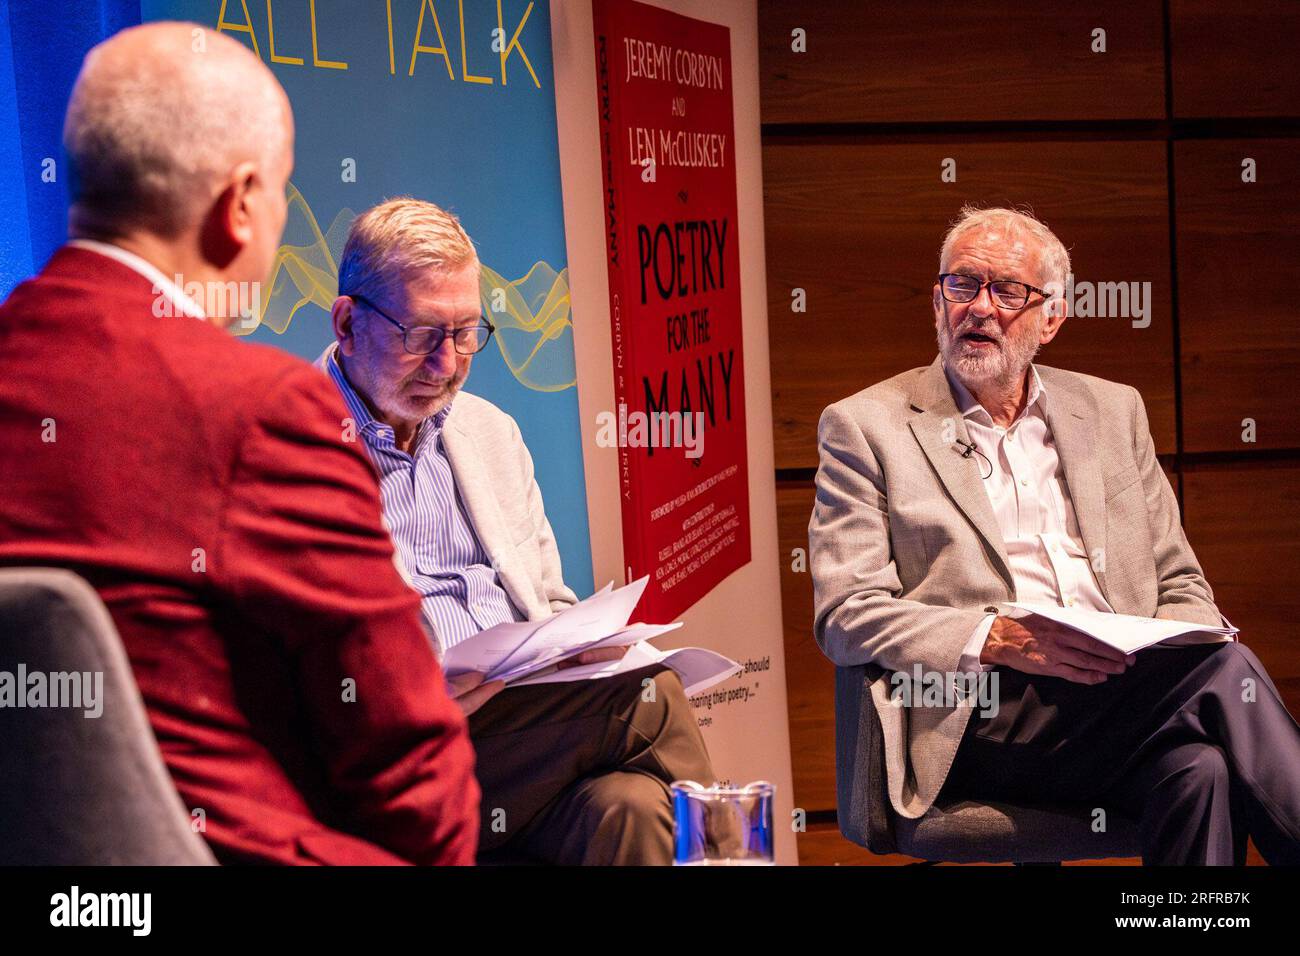 Edinburgh, United Kingdom. 05 August, 2023 Pictured: Iain Dale, Len McCluskey and Jeremy Corbyn. Former Labour leader Jeremy Corbyn MP and renowned trade unionist Len McCluskey are interviewed by LBC presenter Iain Dale at the Edinburgh Fringe. During the interview McCluskey accused Keir Starmer of reneging on an agreement to retain Corbyn in the Labour Party. Jeremy Corbyn was quizzed if he will stand as an independent candidate in his constituency and responded by saying ‘watch this space’. Credit: Rich Dyson/Alamy Live News Stock Photo